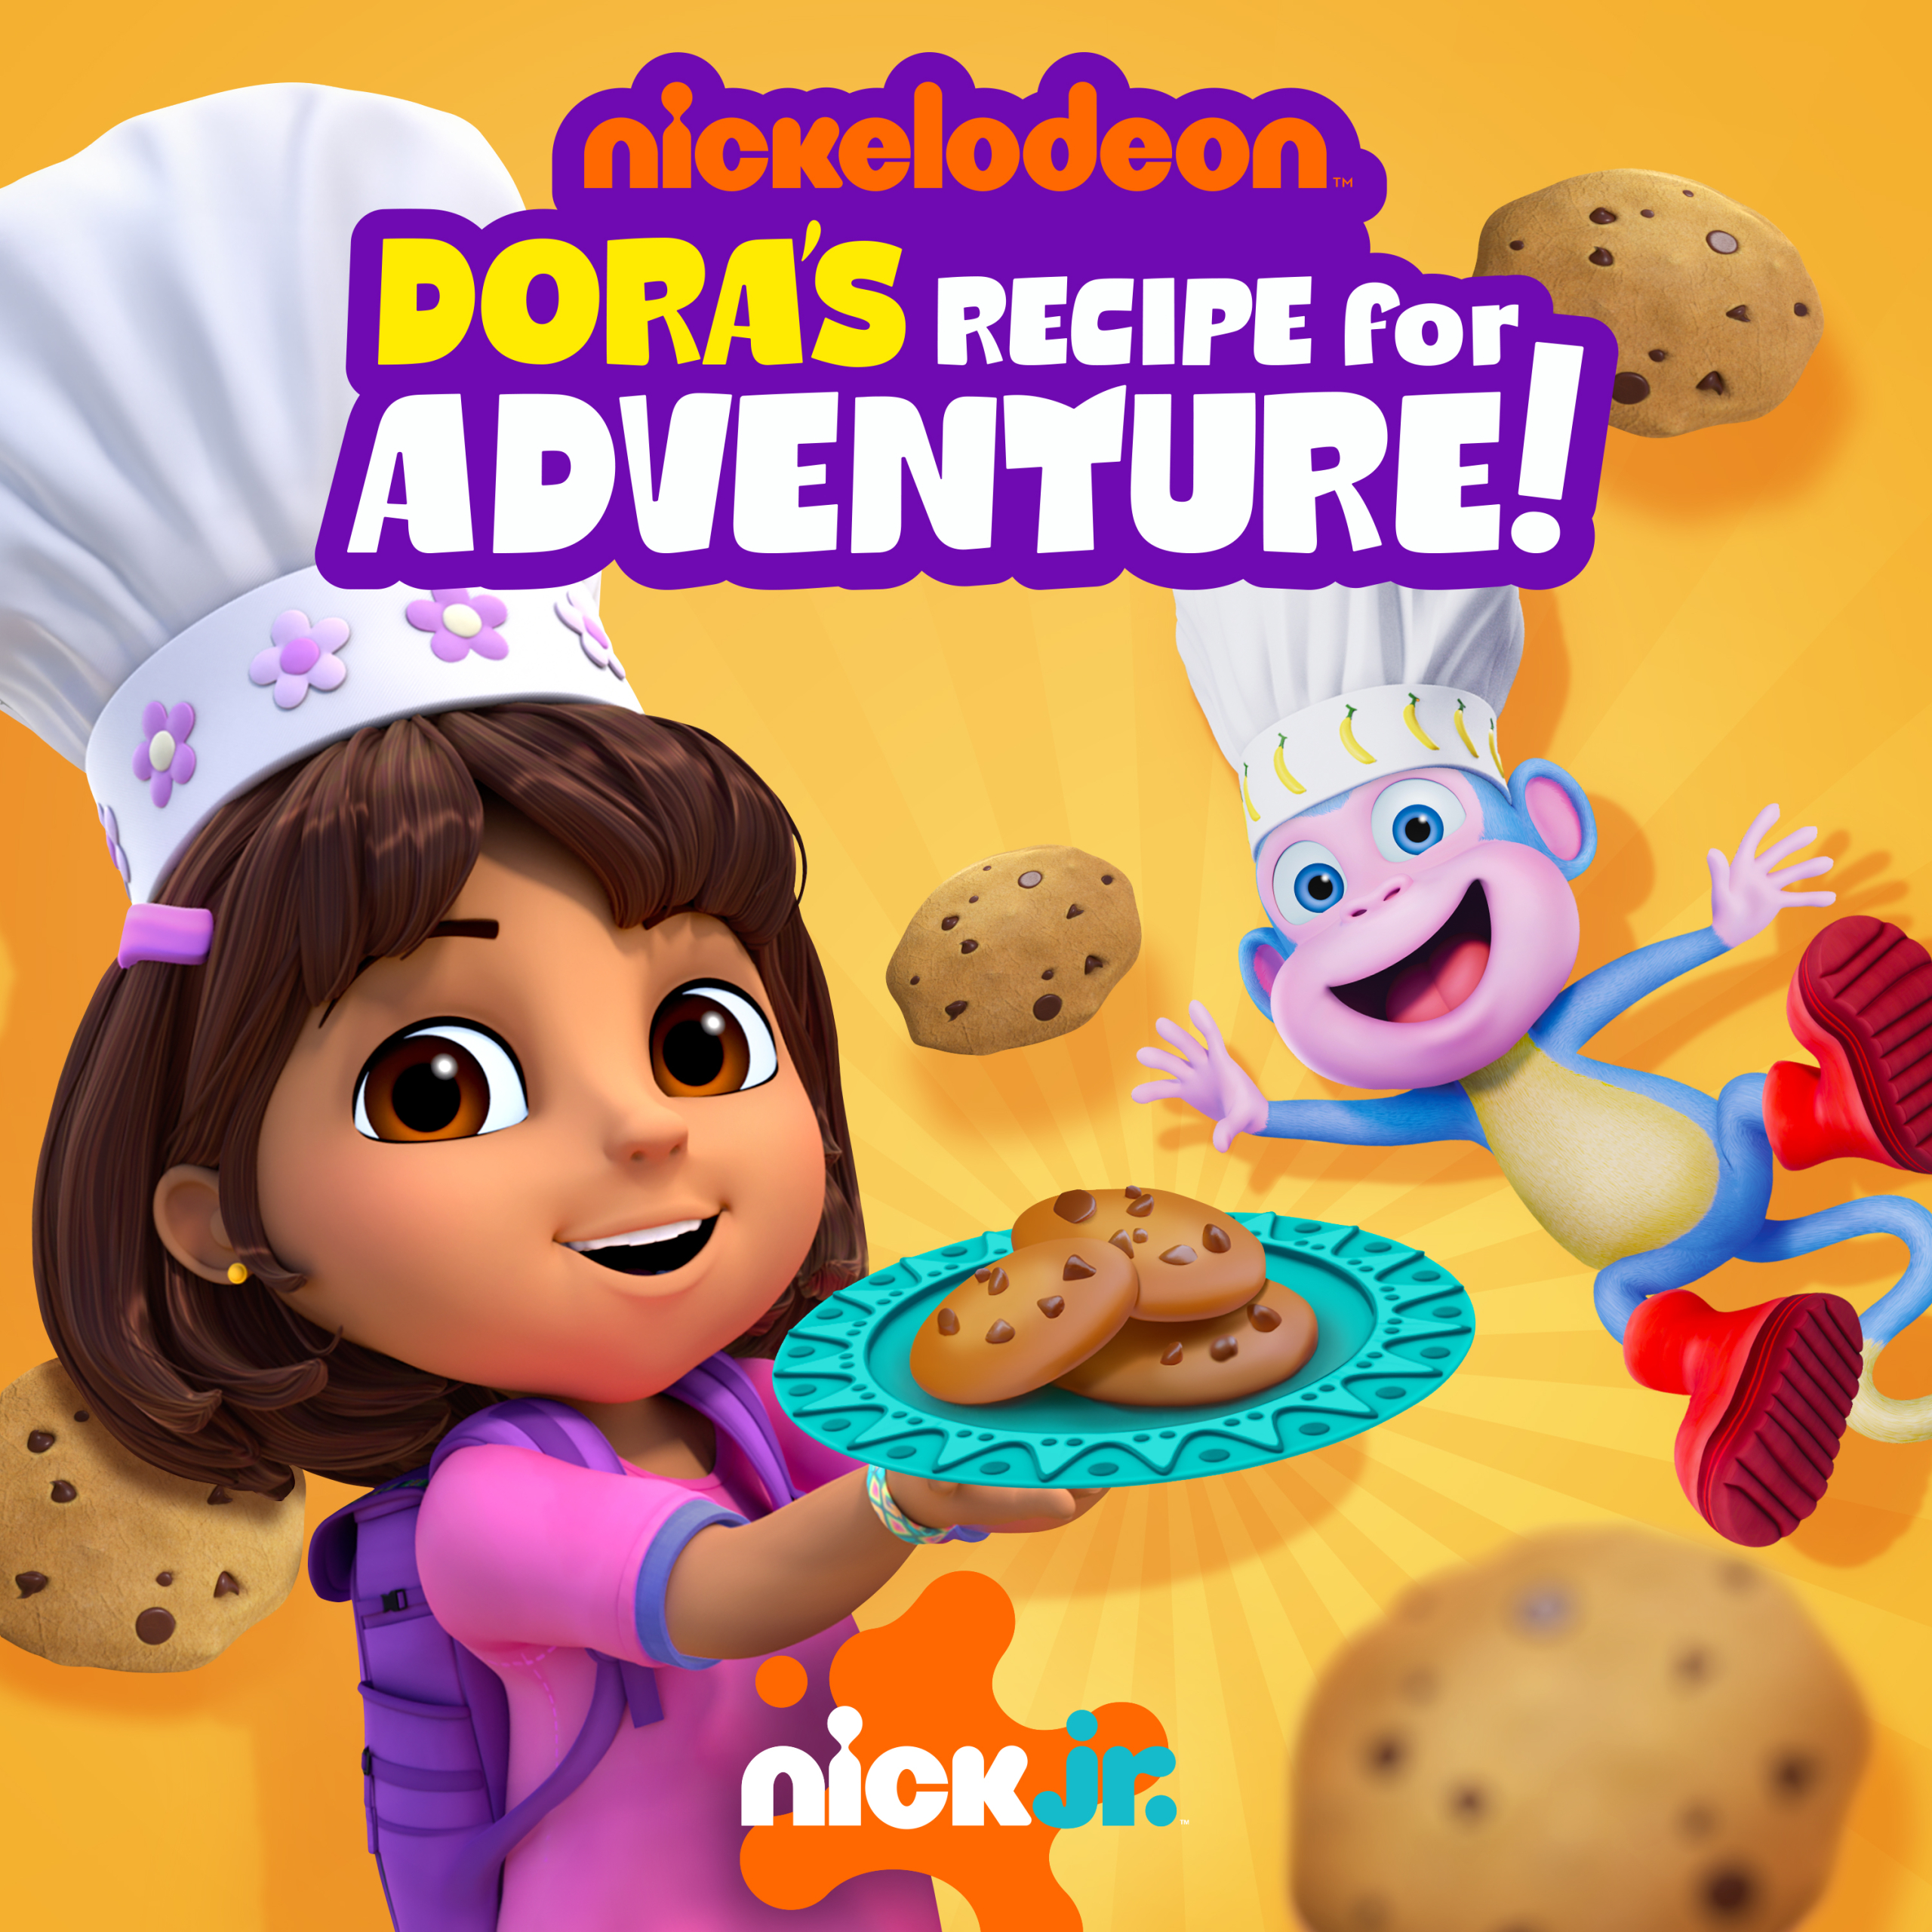 Dora and Boots baking cookies in front of logo for podcast Dora's Recipe for Adventure